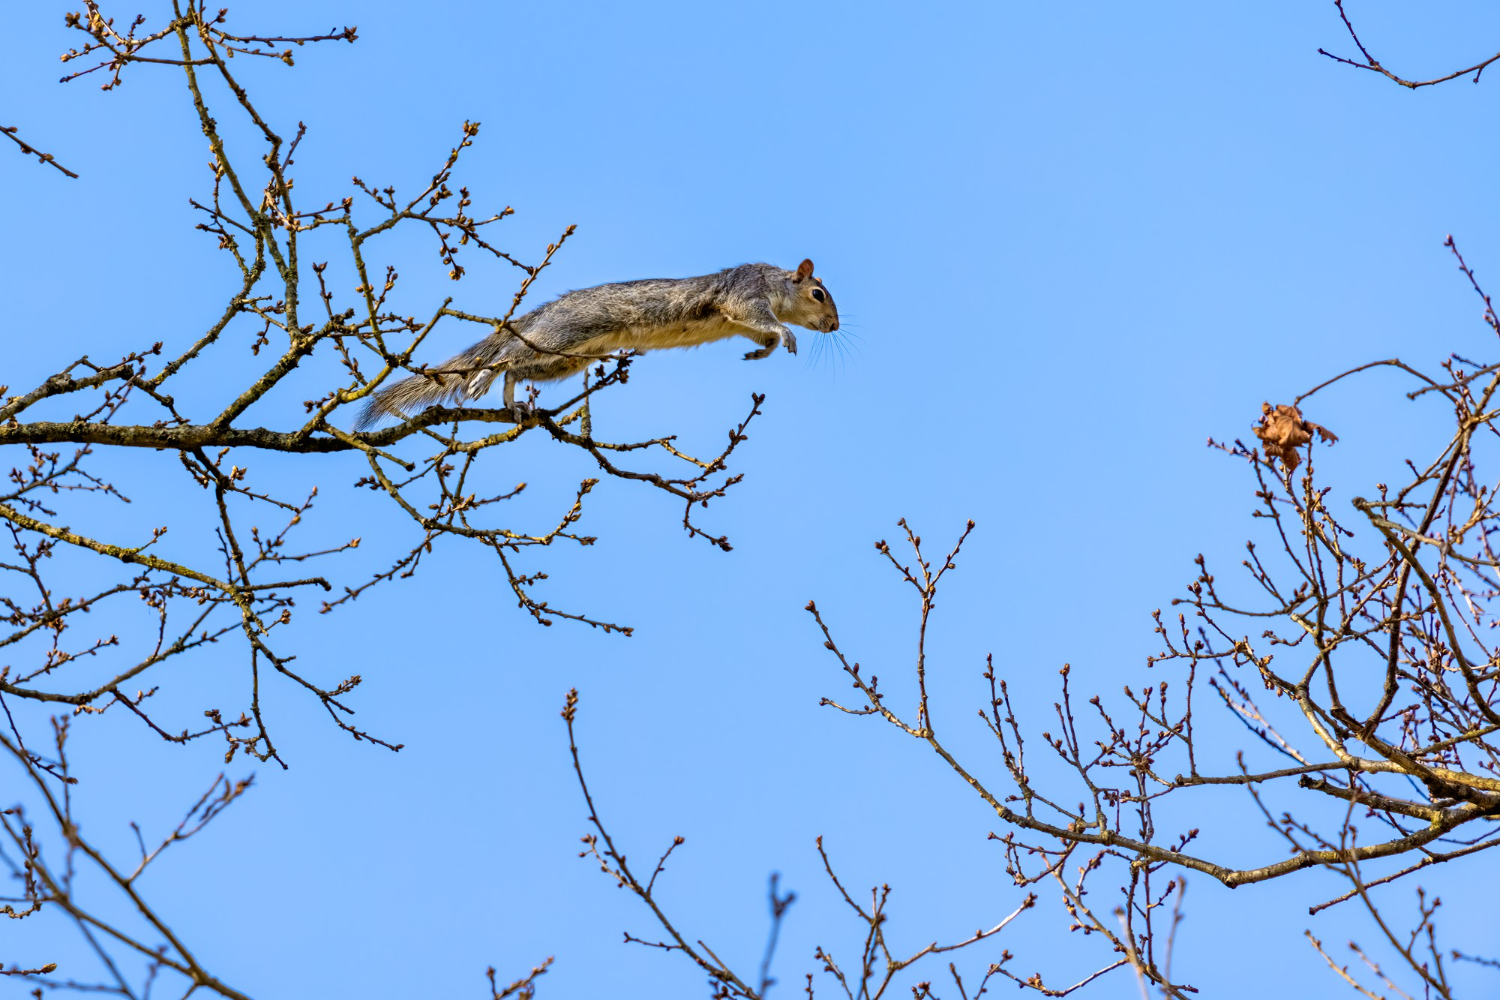 A grey squirrel jumping from one branch to the next.